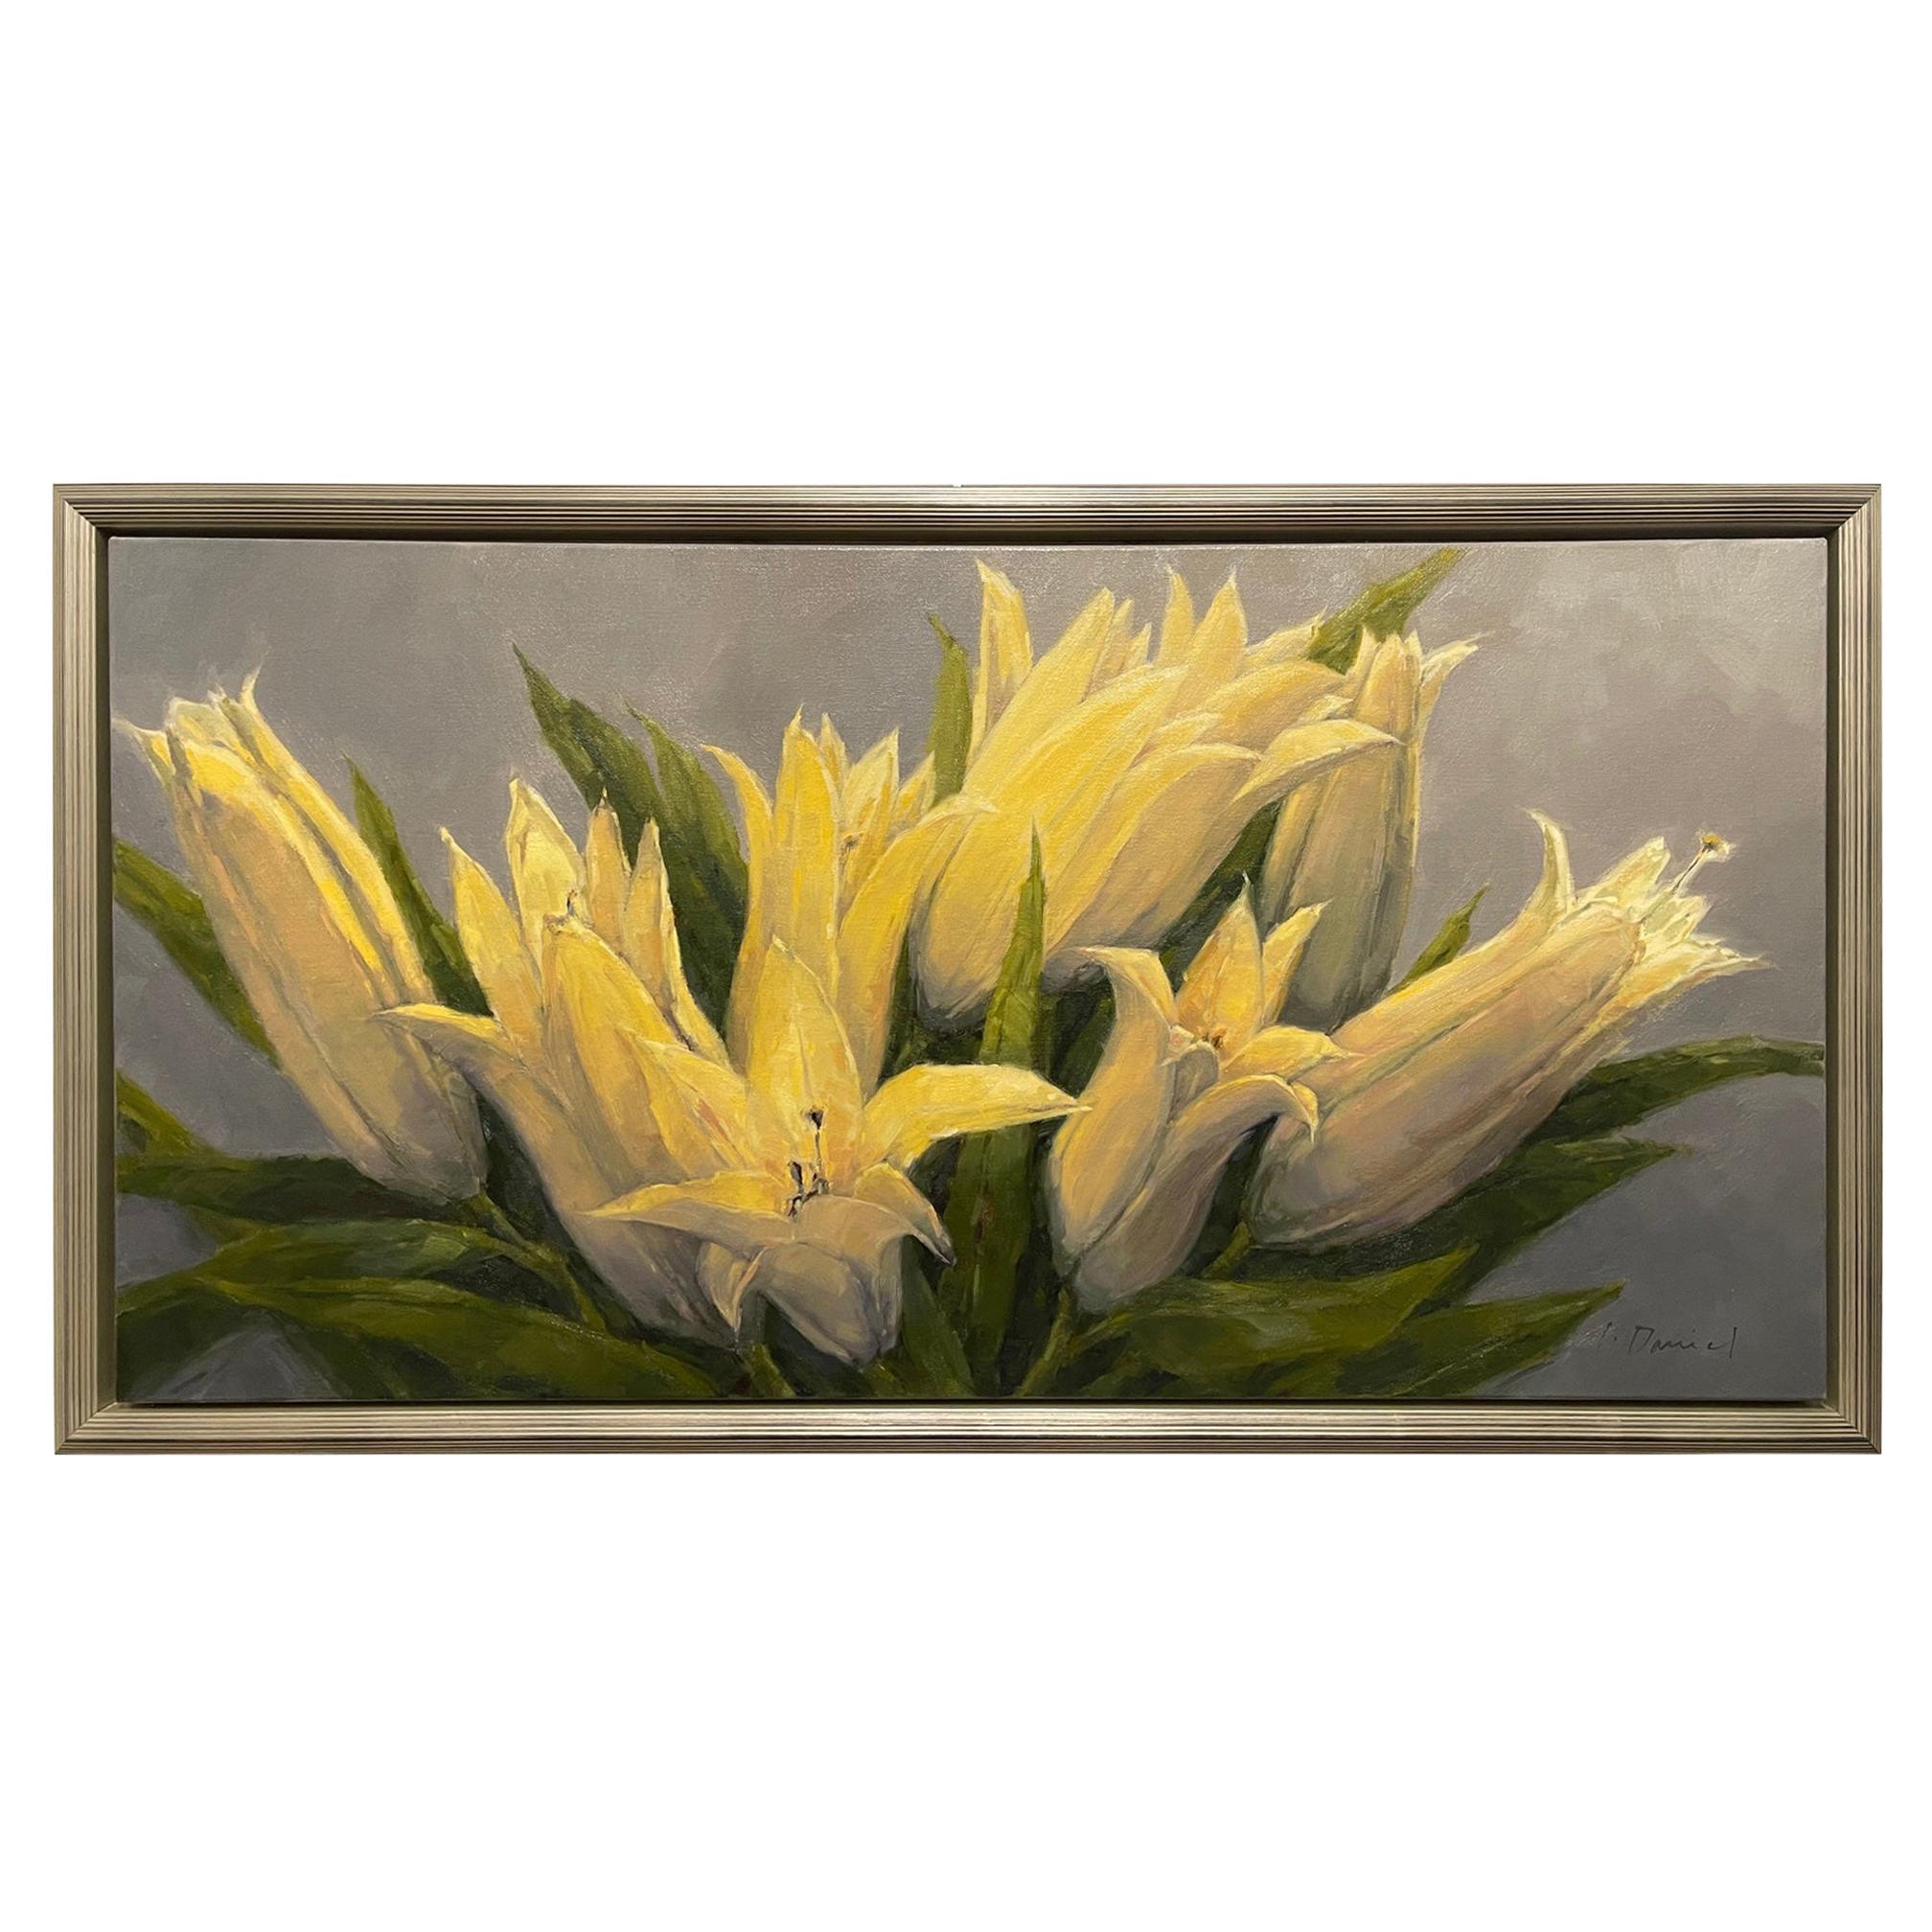 Framed Oil on Canvas "Consider the Lilies" Floral Scene by Laurel Daniel